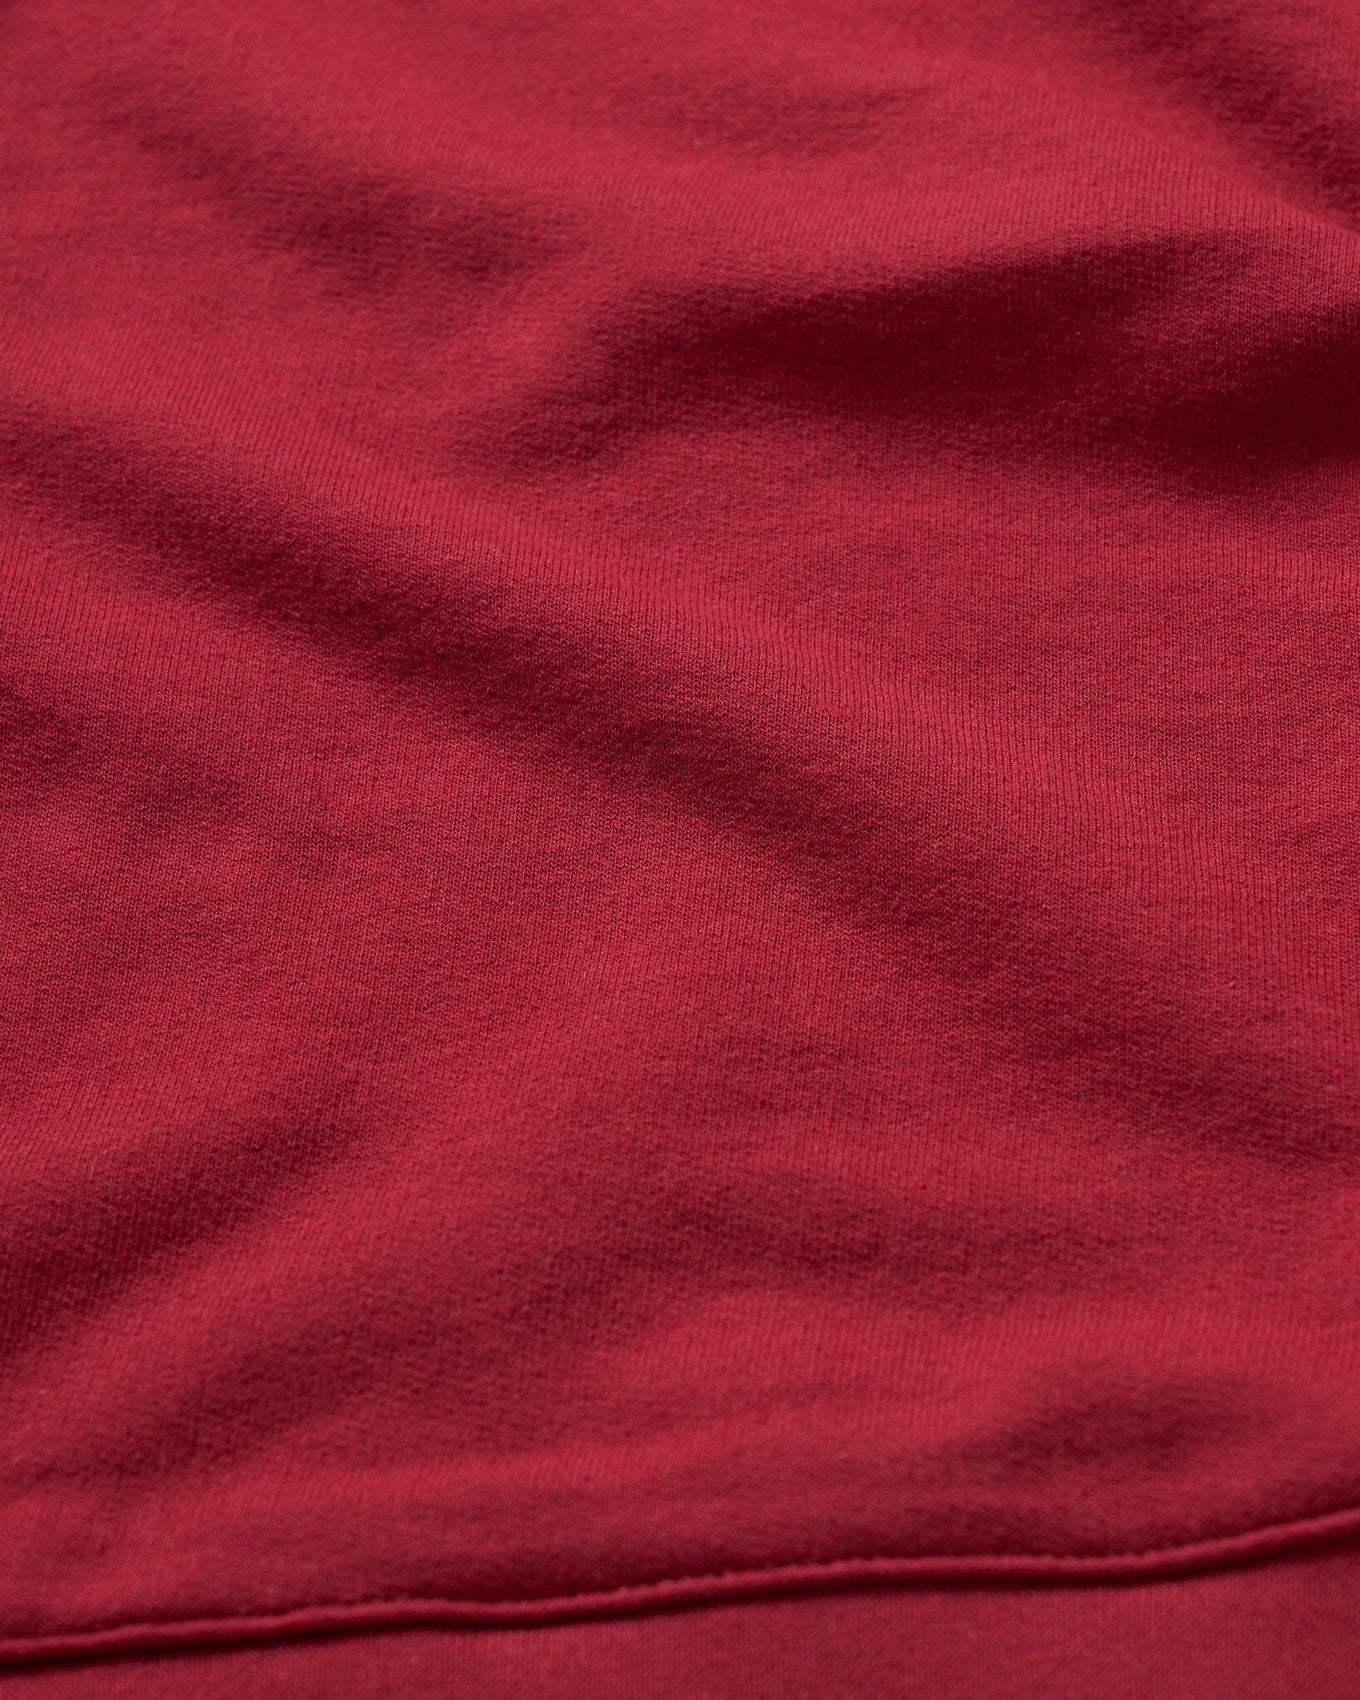 ReApparel Garbage Crew Neck . in color Garnet and shape long sleeve